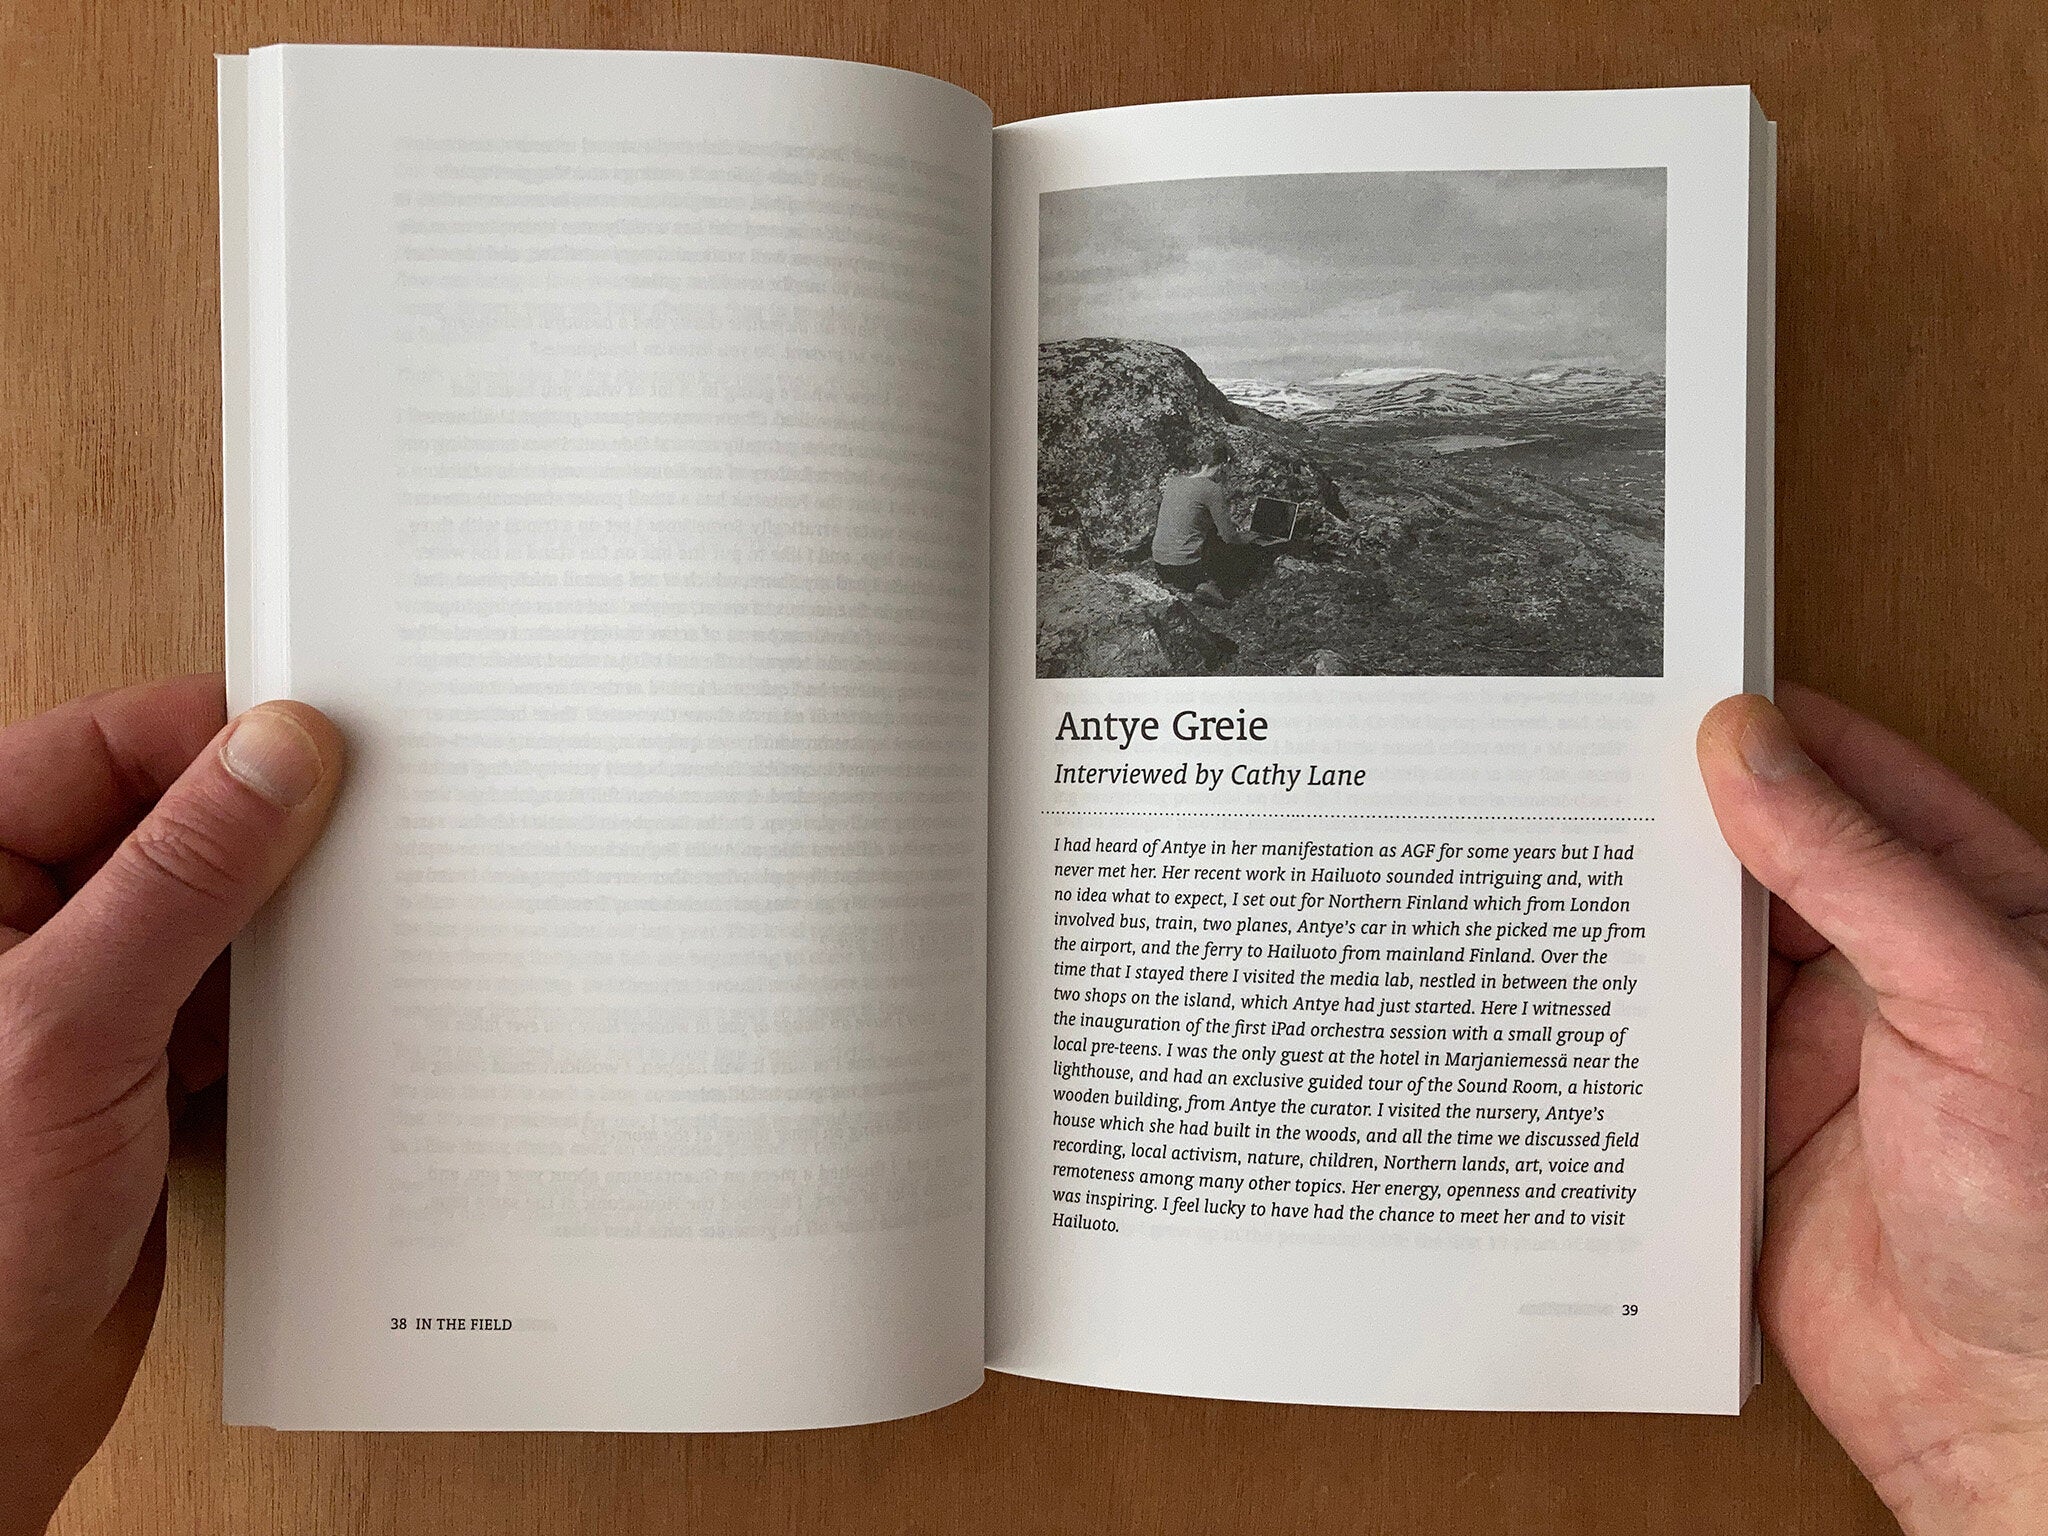 IN THE FIELD: THE ART OF FIELD RECORDING by Cathy Lane and Angus Carlyle